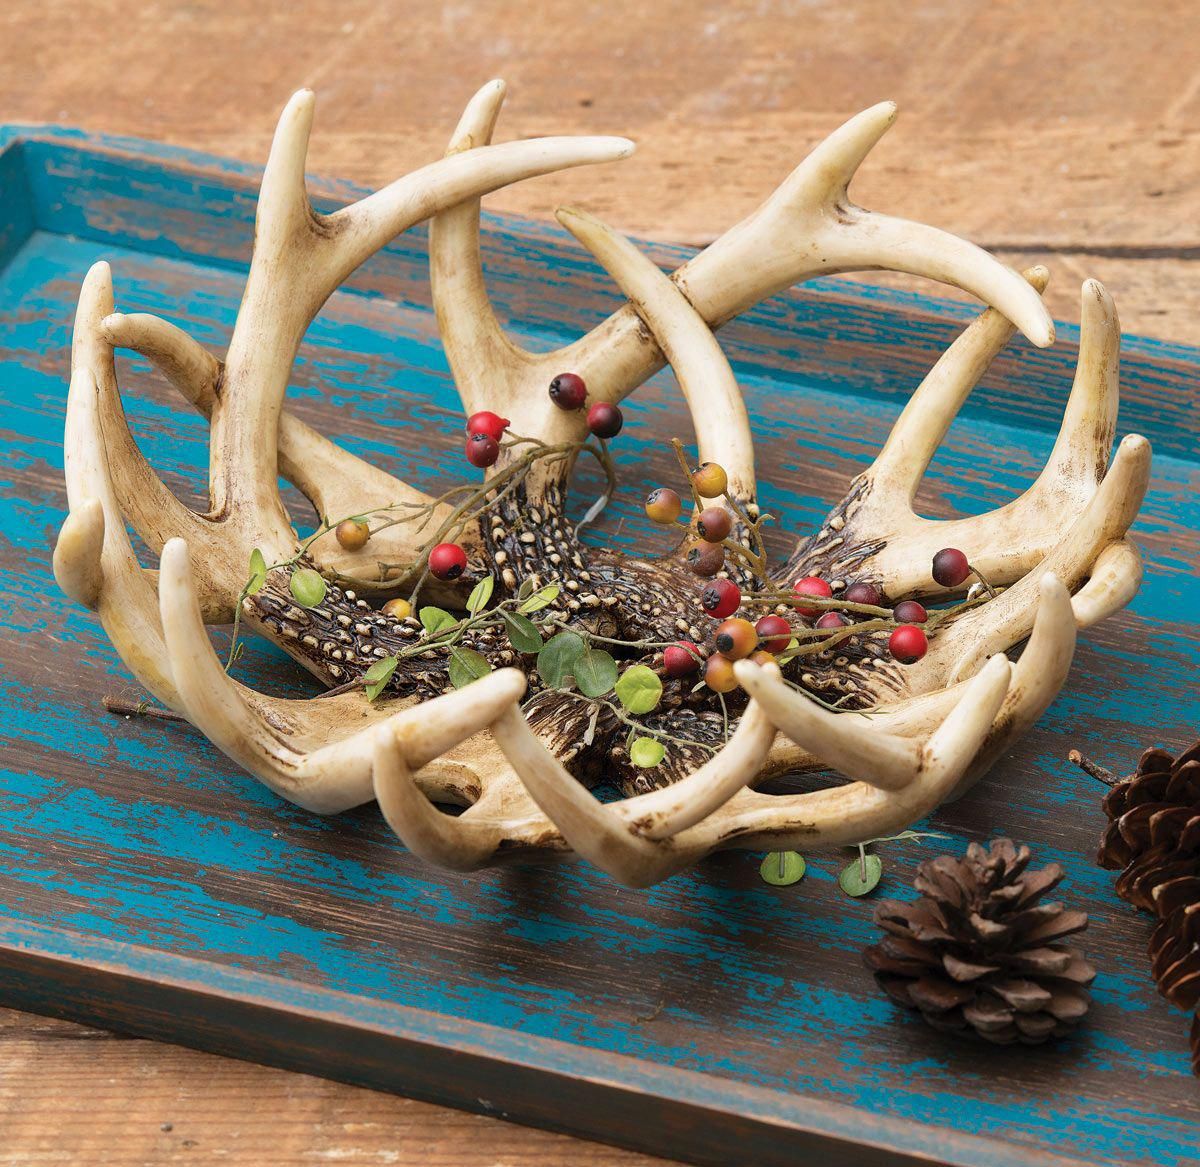 Why Are Cows And Antlers Popular In Home Decor